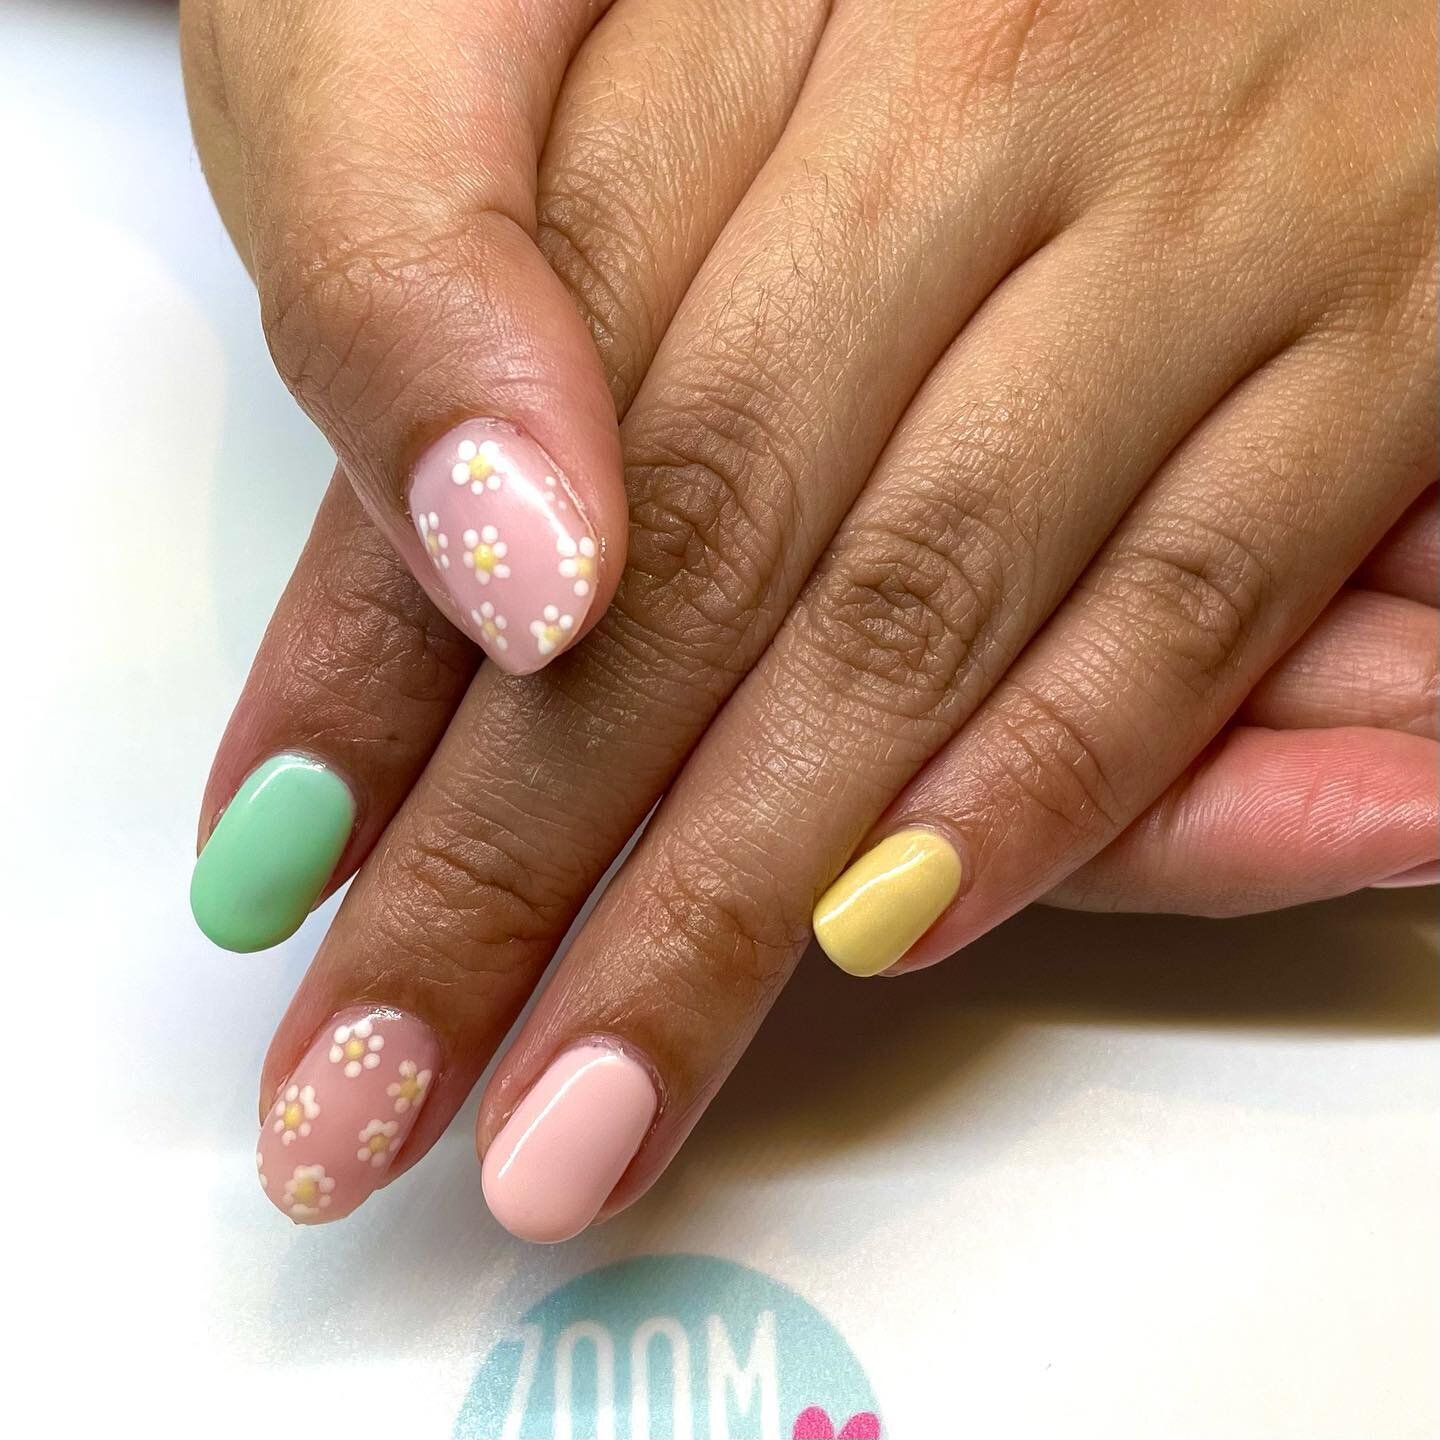 😢 really thought we&rsquo;d be back in two weeks

Here are some Mani&rsquo;s from the past year-ish. 

#zoommani  #nails #naturalnails #gelnails #manimaven #nailstylist  #notd  #nailsoftheday #naildesign #nailsofinstagram #columbusnails #socolumbus 